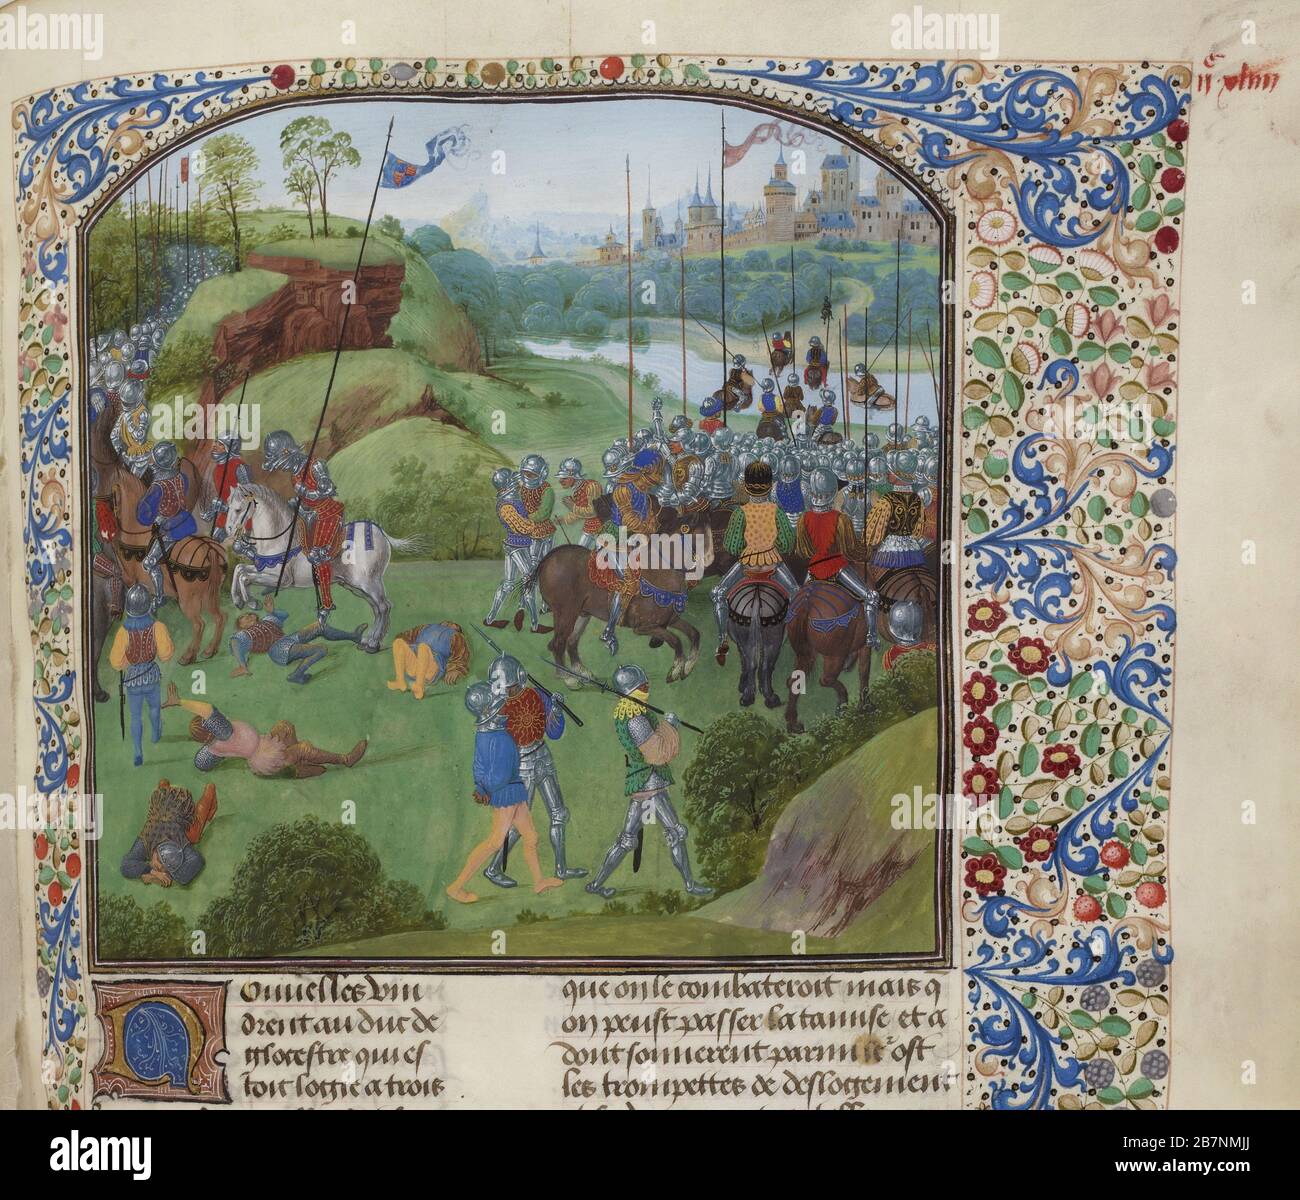 The Battle of Radcot Bridge on 19 December 1387 (Miniature from the Grandes Chroniques de France by Jean Froissart), ca 1470-1475. Found in the Collection of Biblioth&#xe8;que Nationale de France. Stock Photo